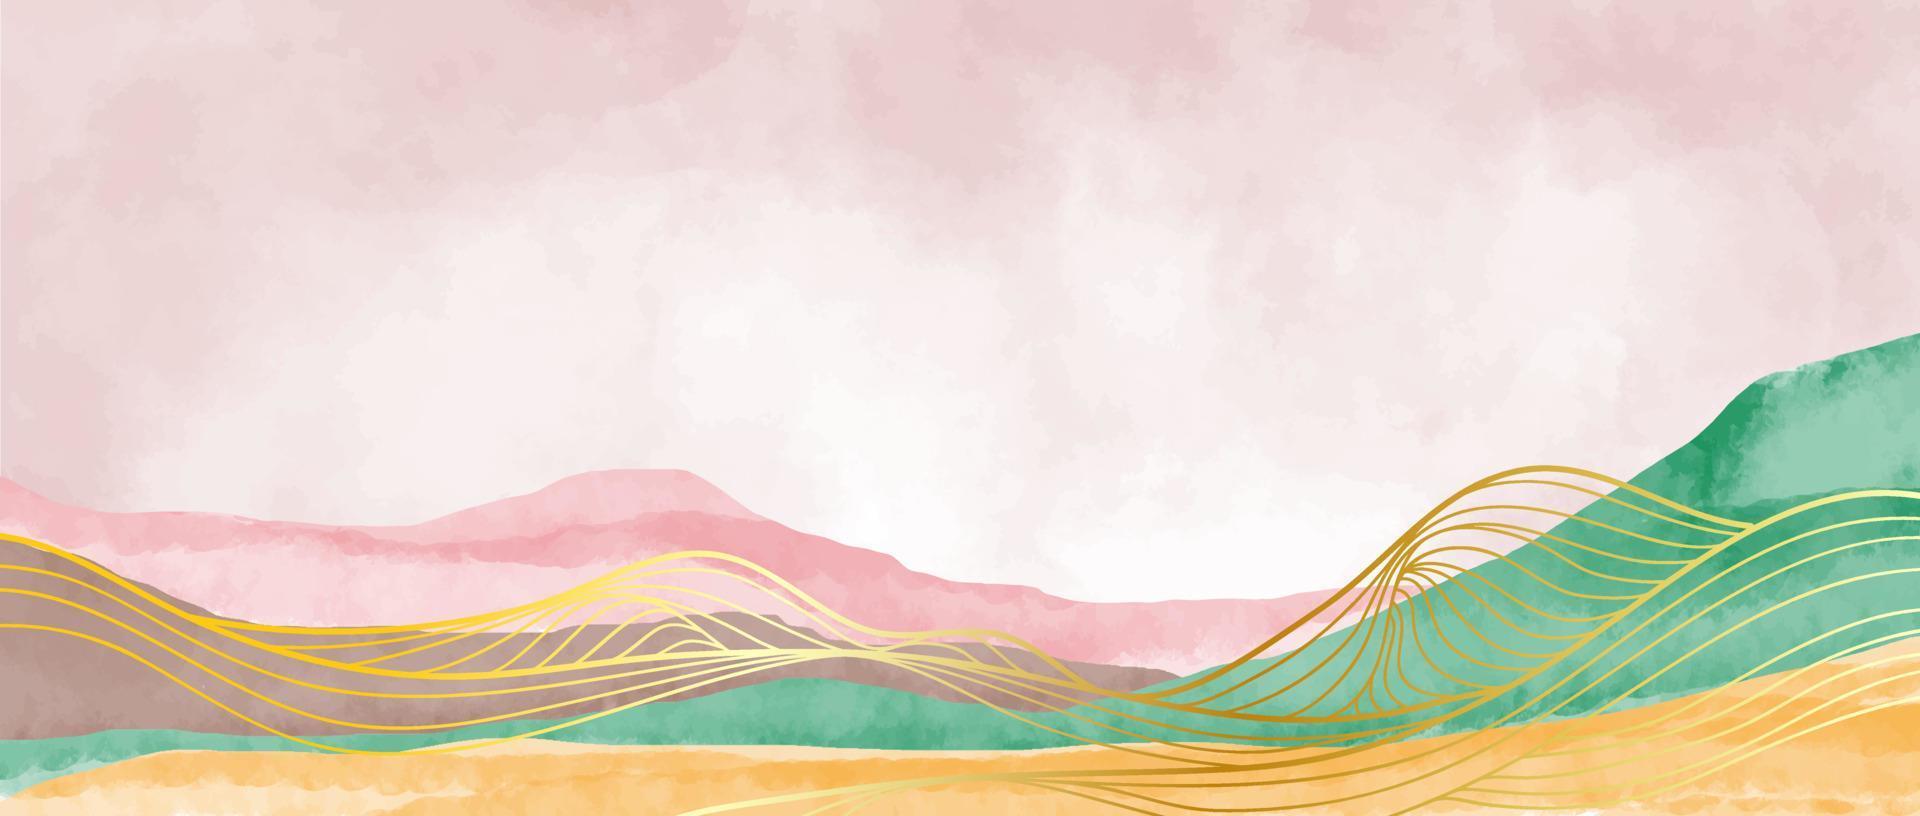  Bürste Hintergrundbild 1920x816. Mountain landscape background with watercolor brush and line wave pattern. Abstract contemporary aesthetic background landscapes. vector illustrations